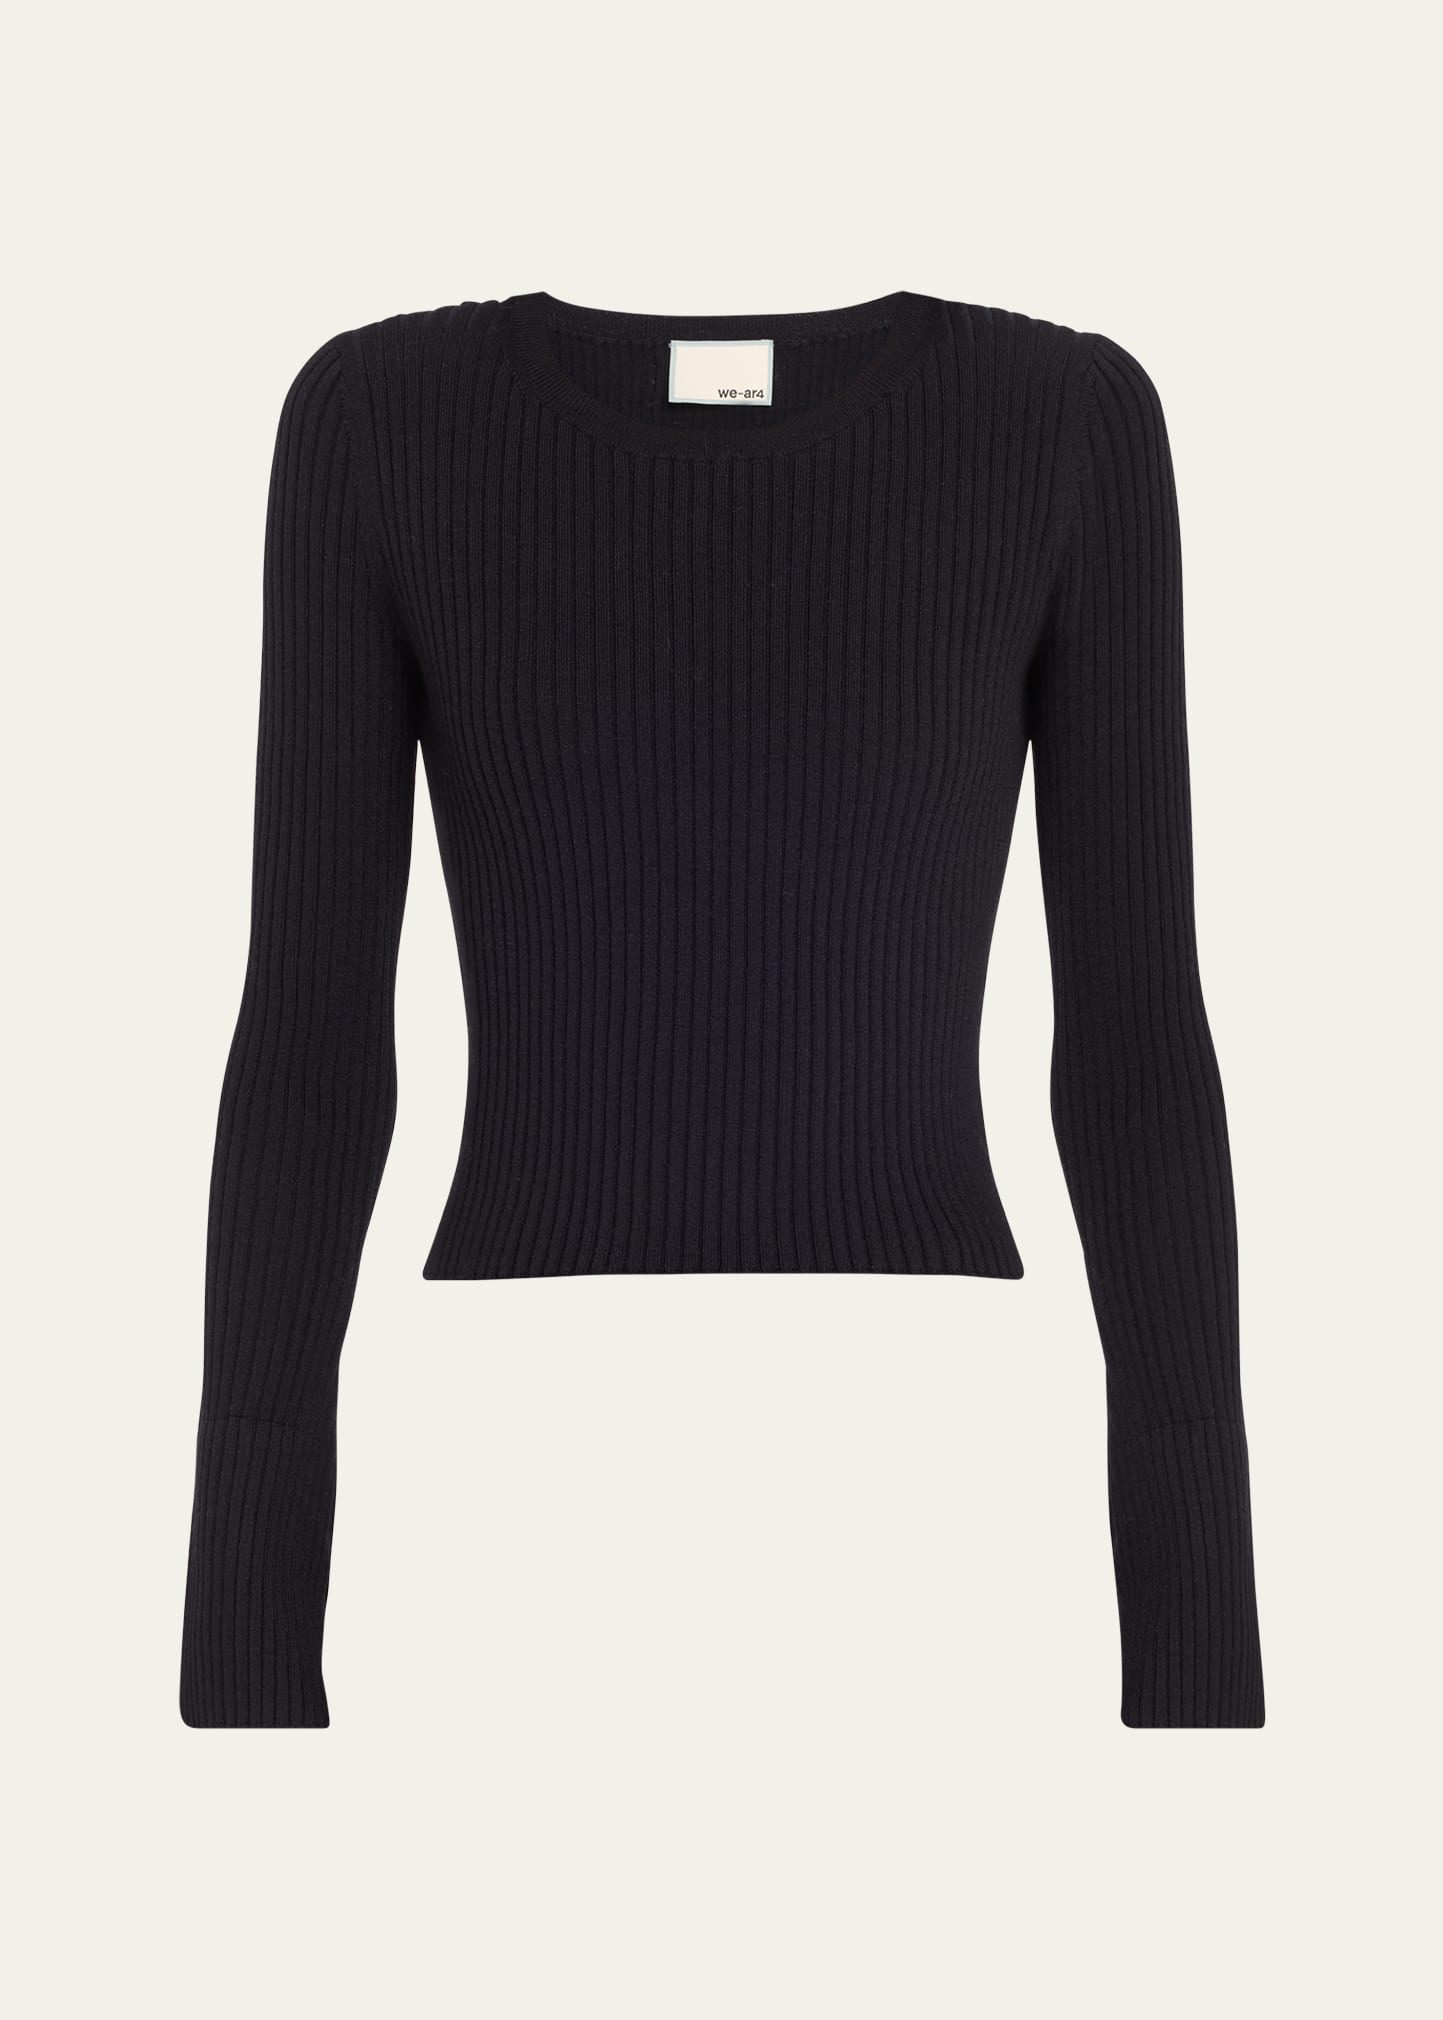 The Mercer Knit Top